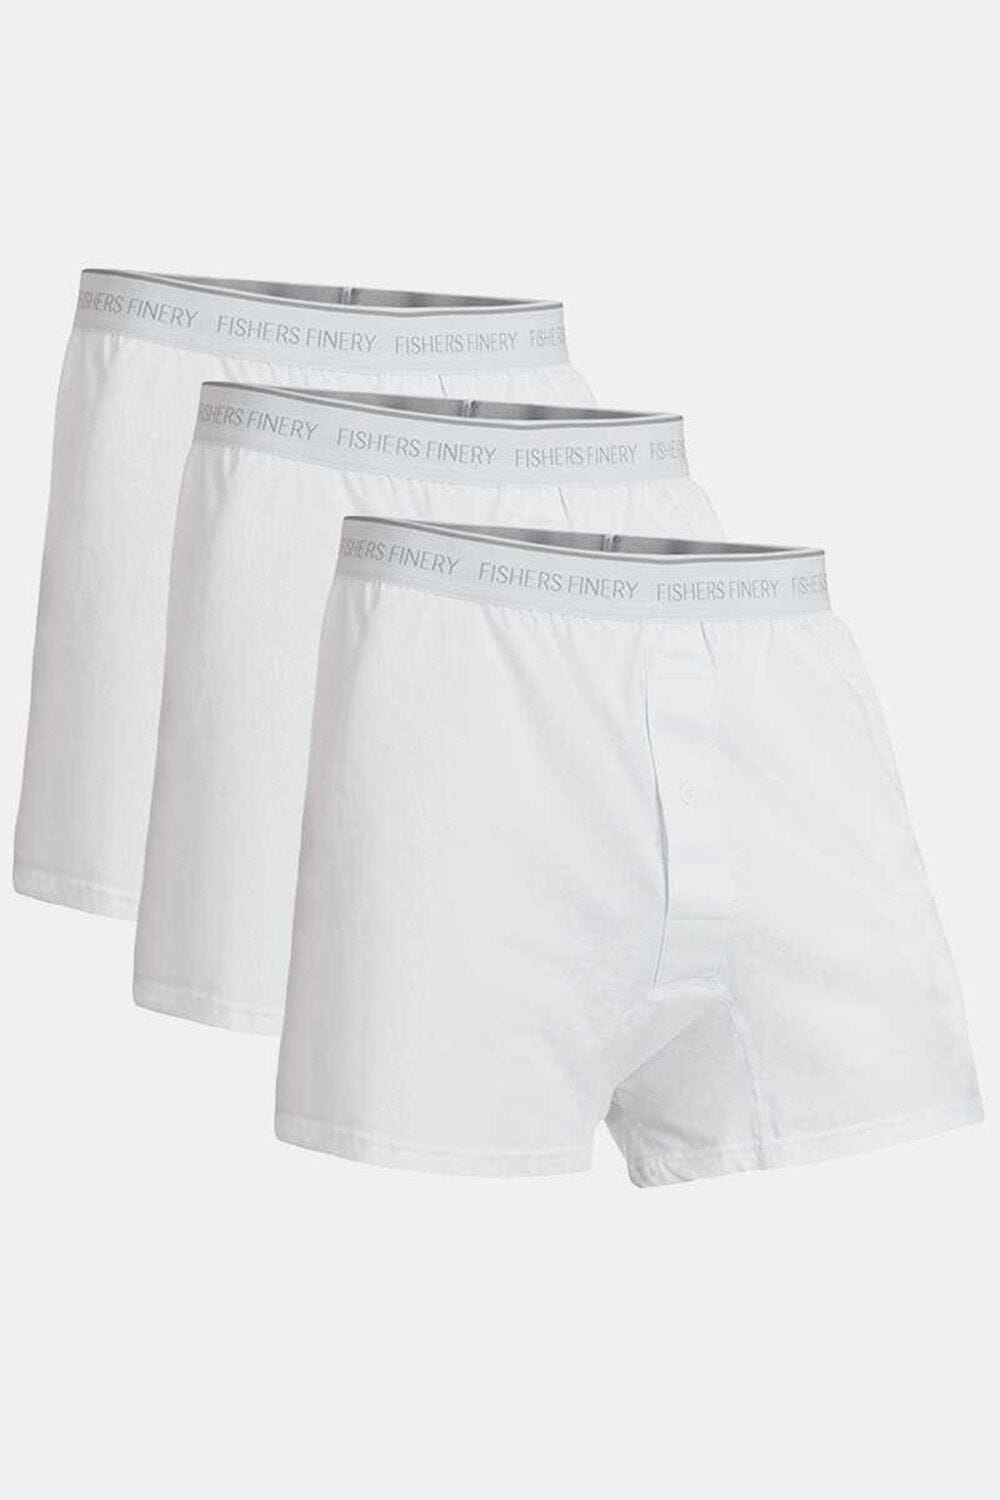 Men's Relaxed Fit Soft Knit Boxer - Multi Pack Options Mens>Underwear Fishers Finery White S 3 Pack